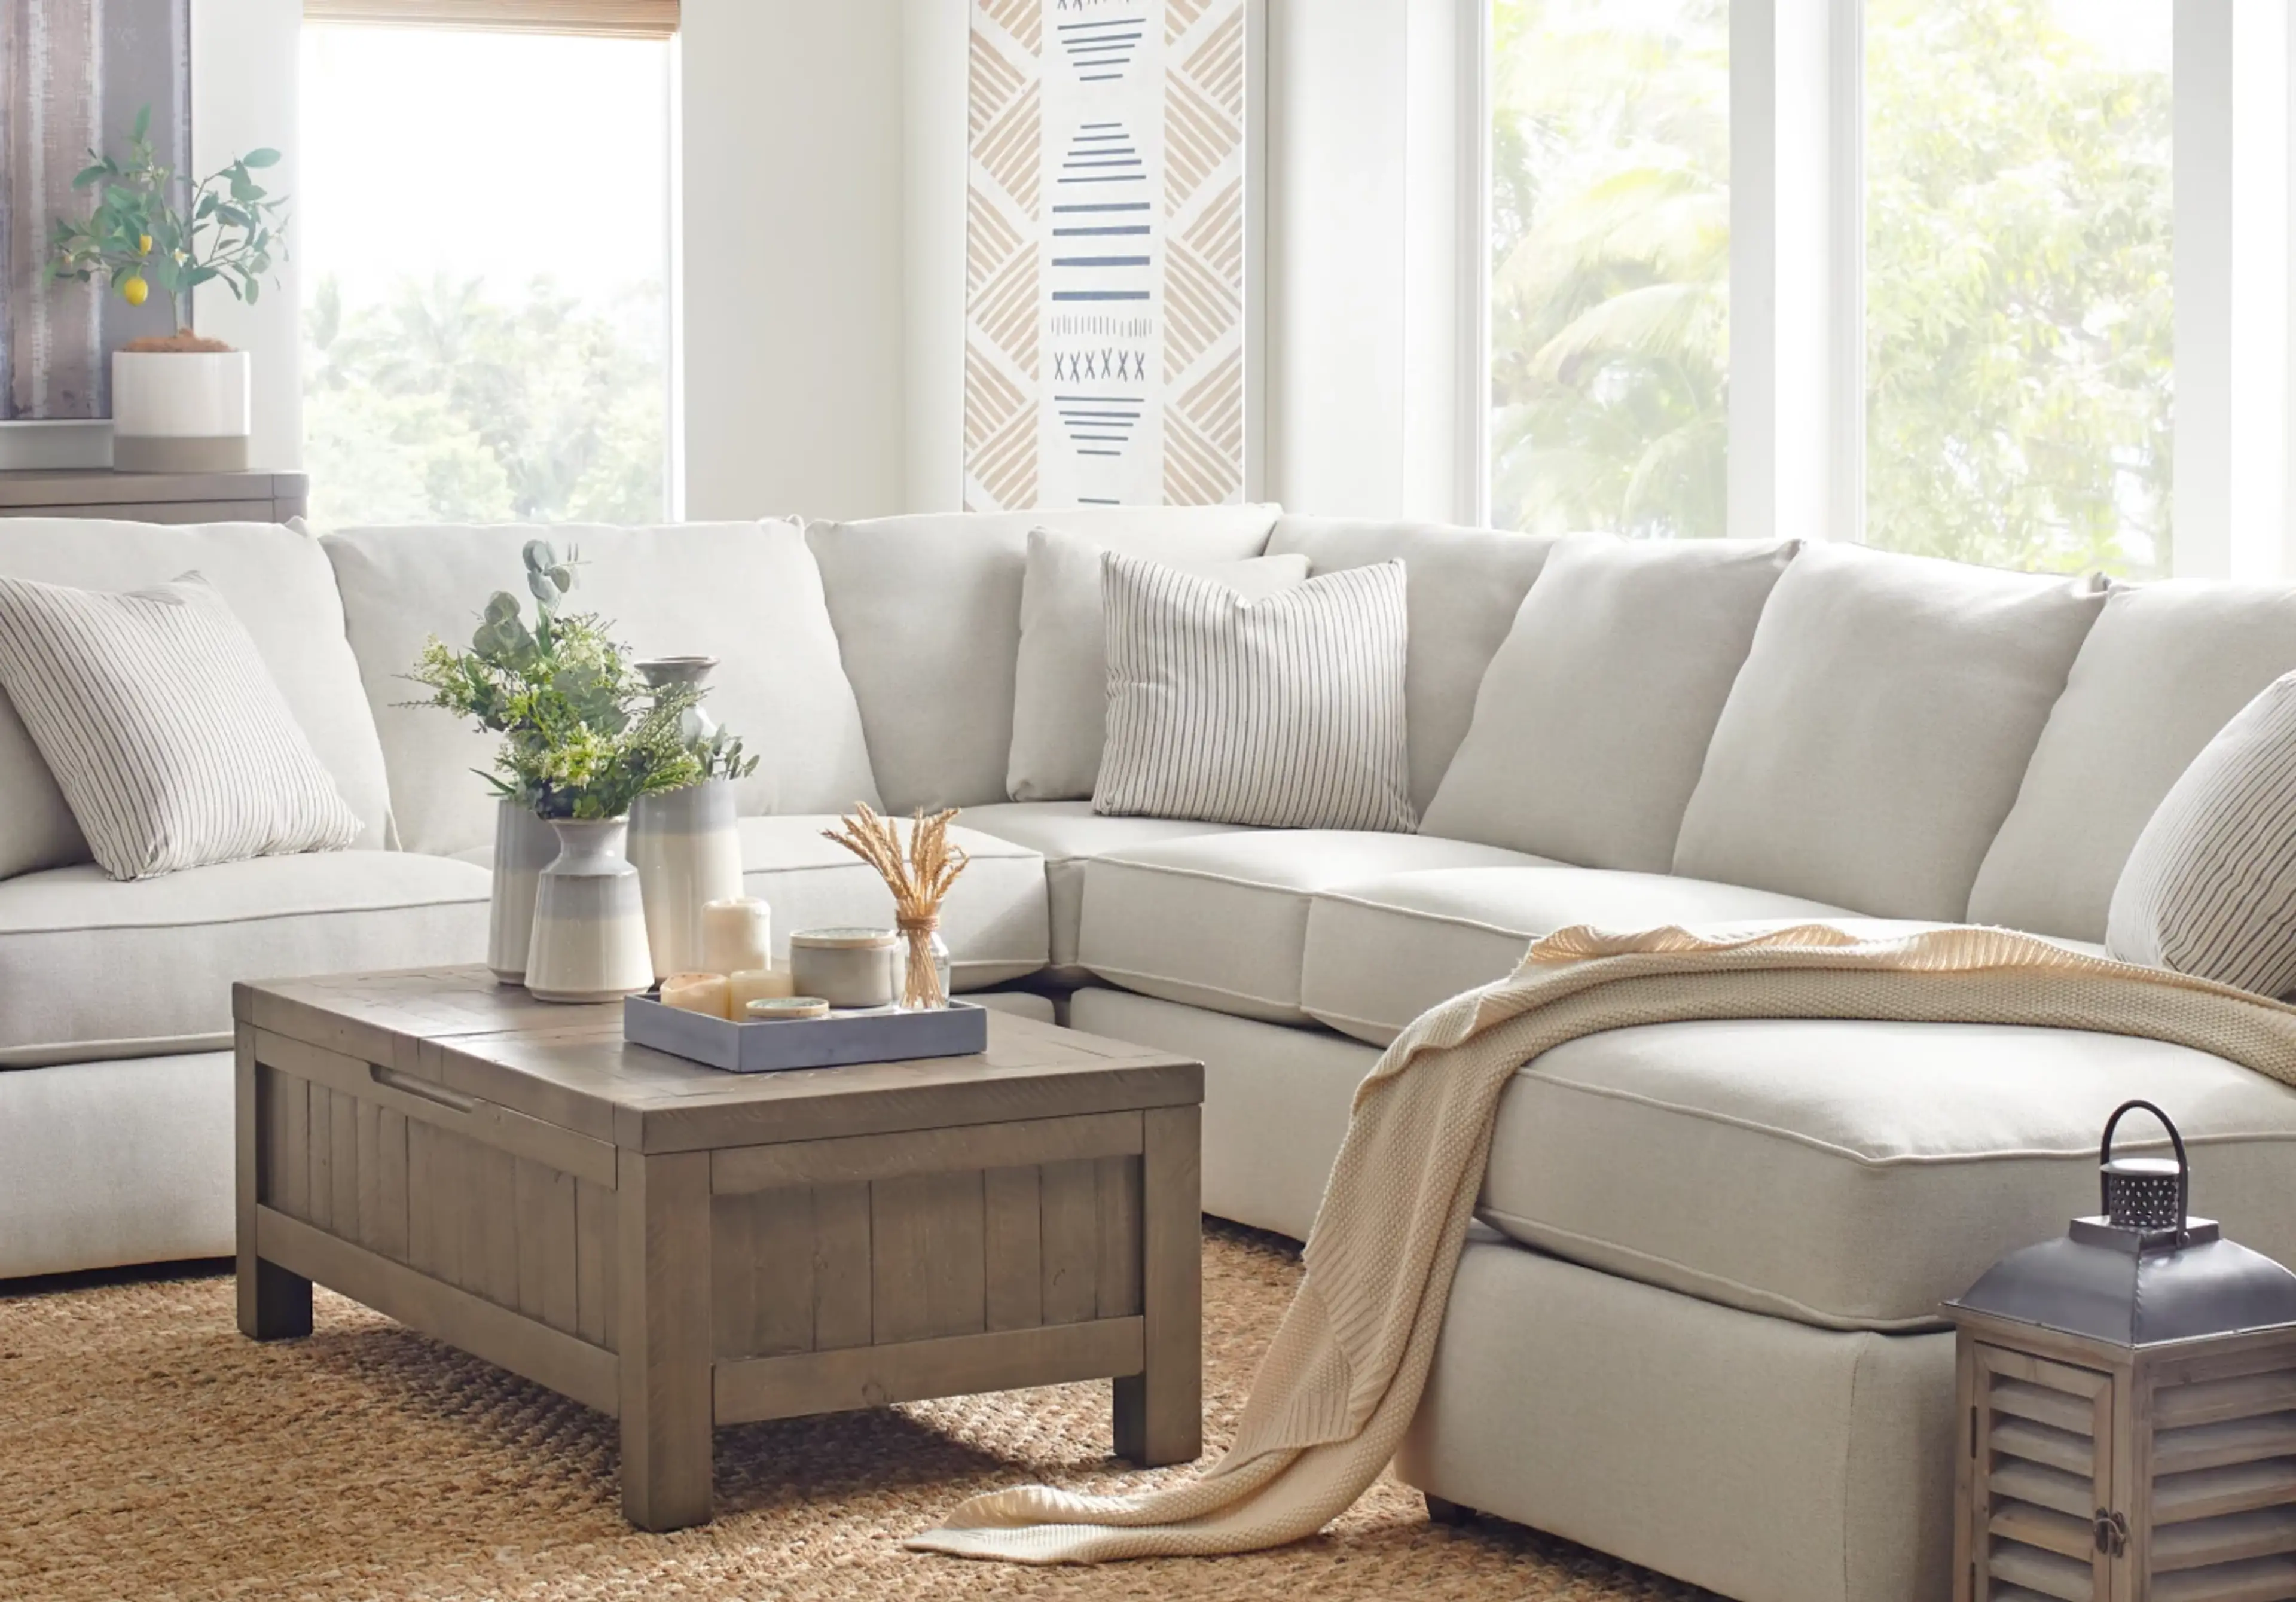 Creating Cozy Corners: Family-Friendly Sofas and Sectionals for a Welcoming Home